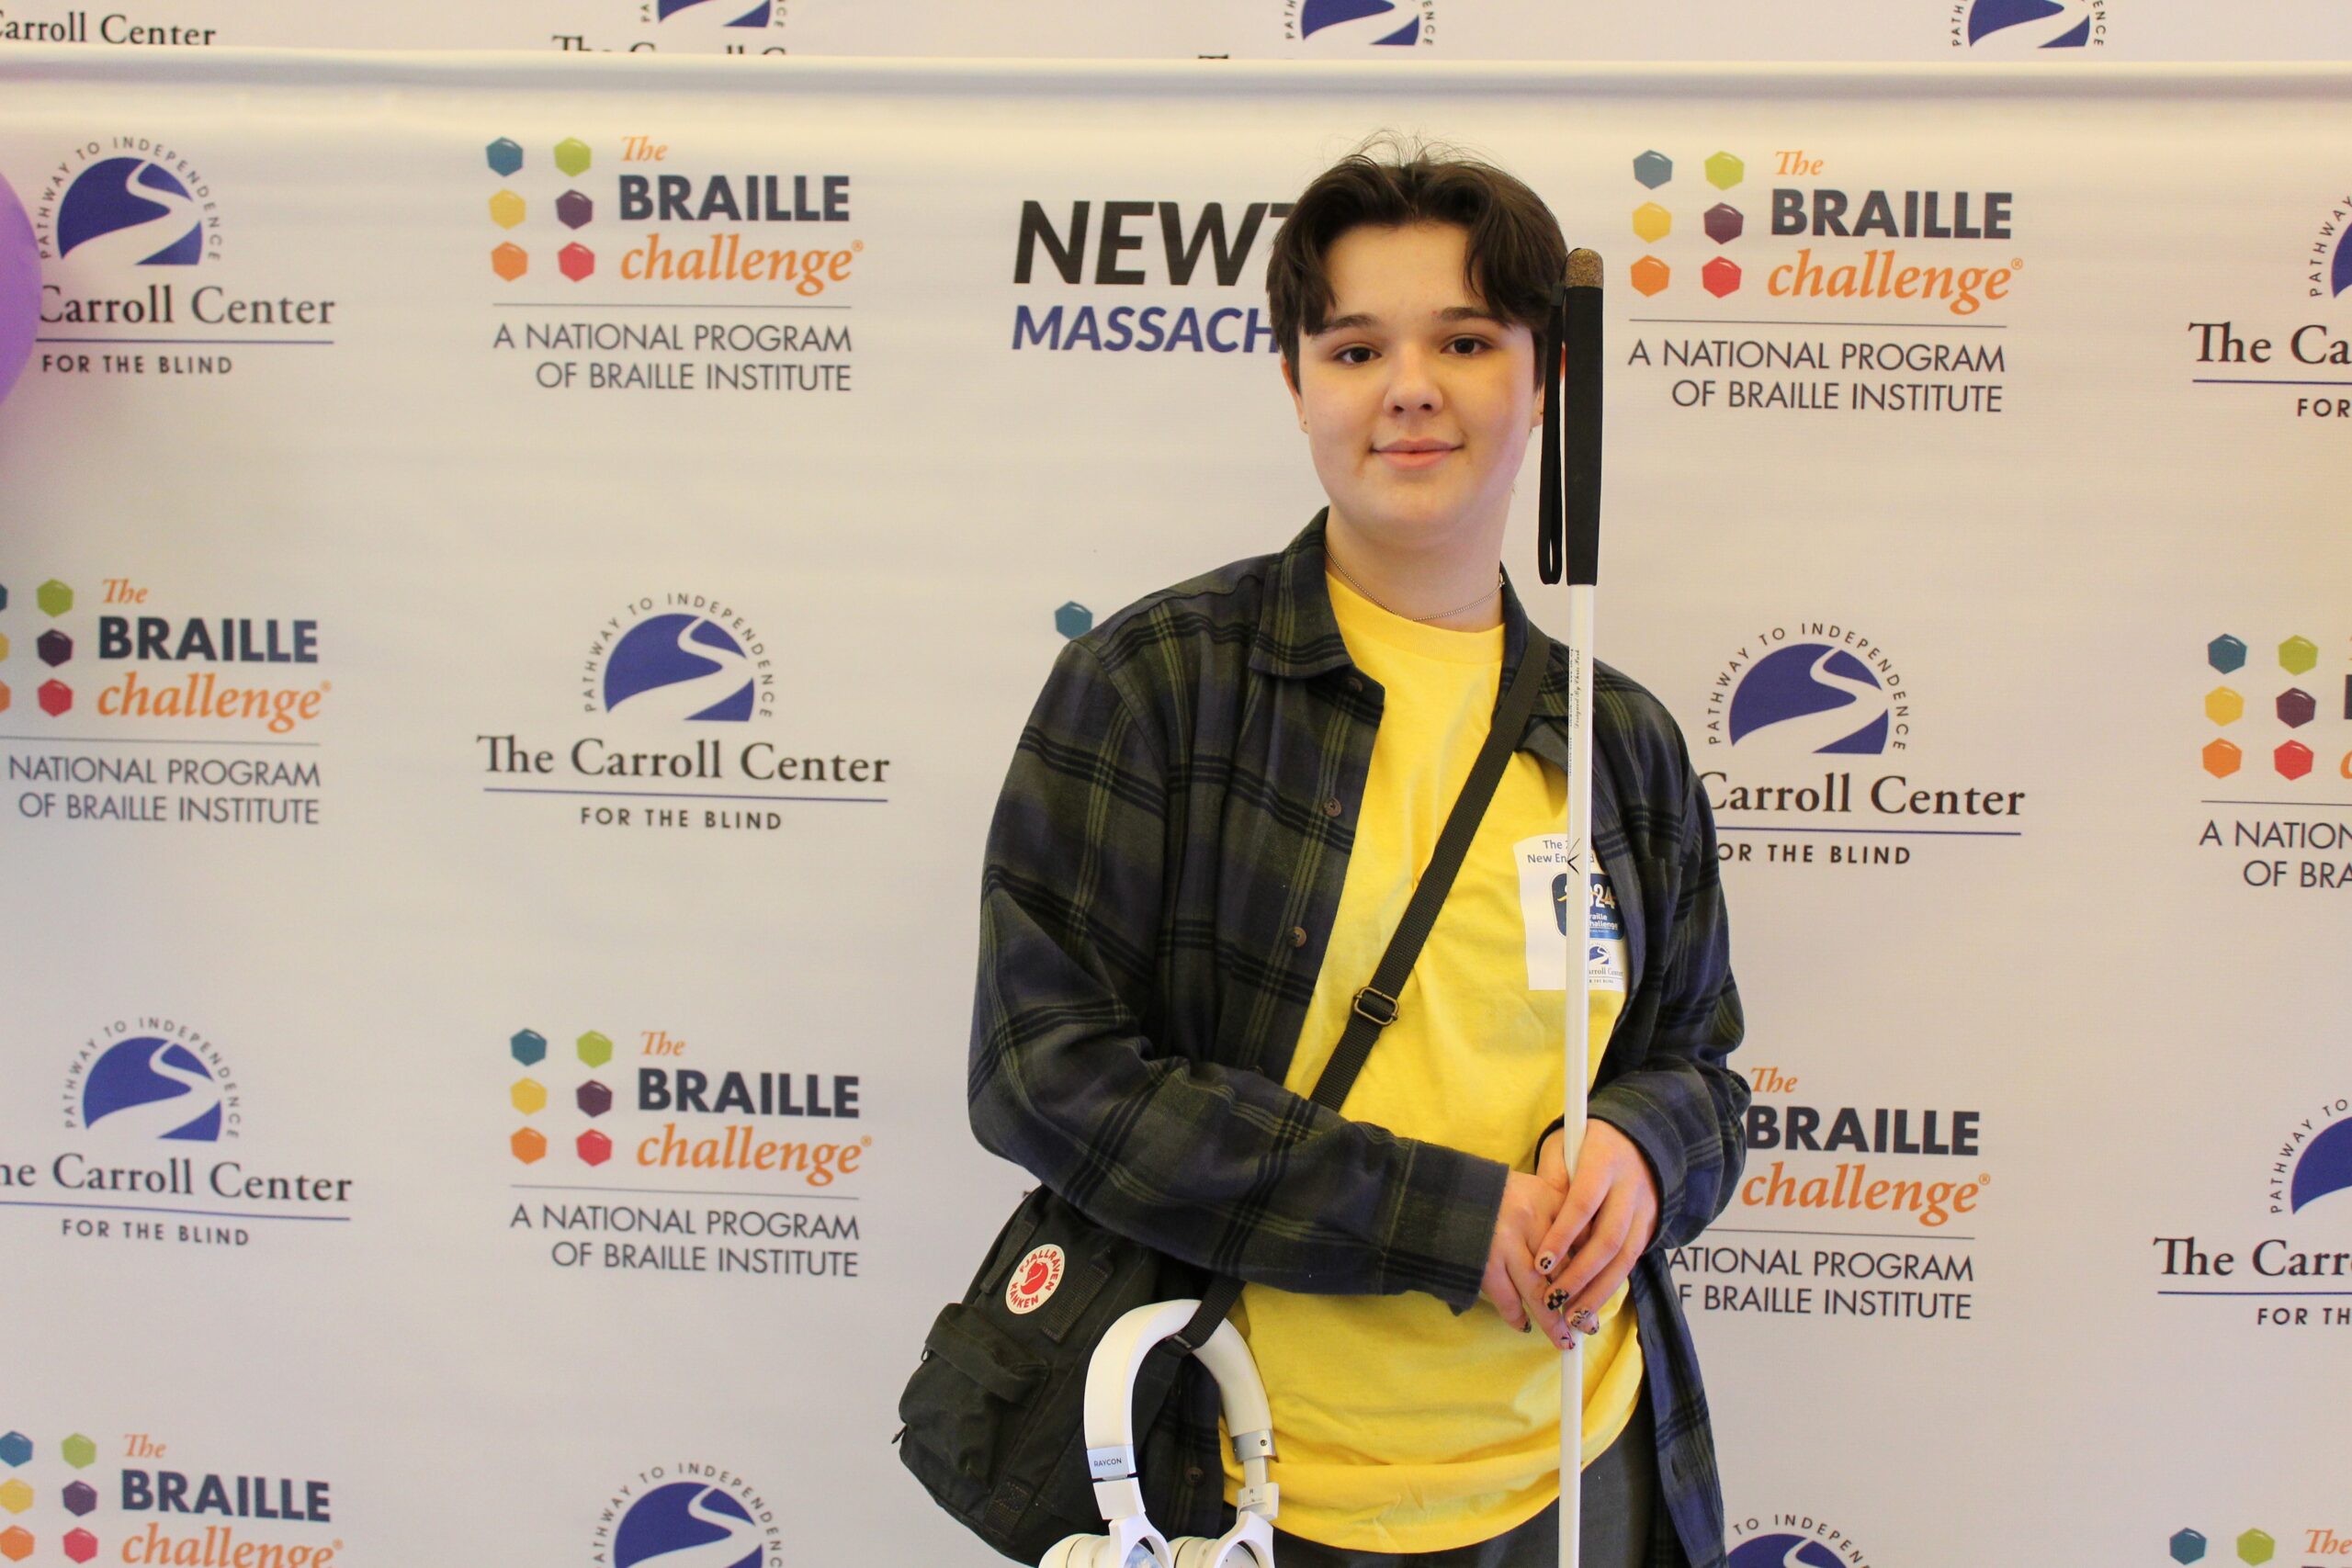 Braille Challenge participant smiling for a photo in front of the Carroll Center Braille Challenge backdrop